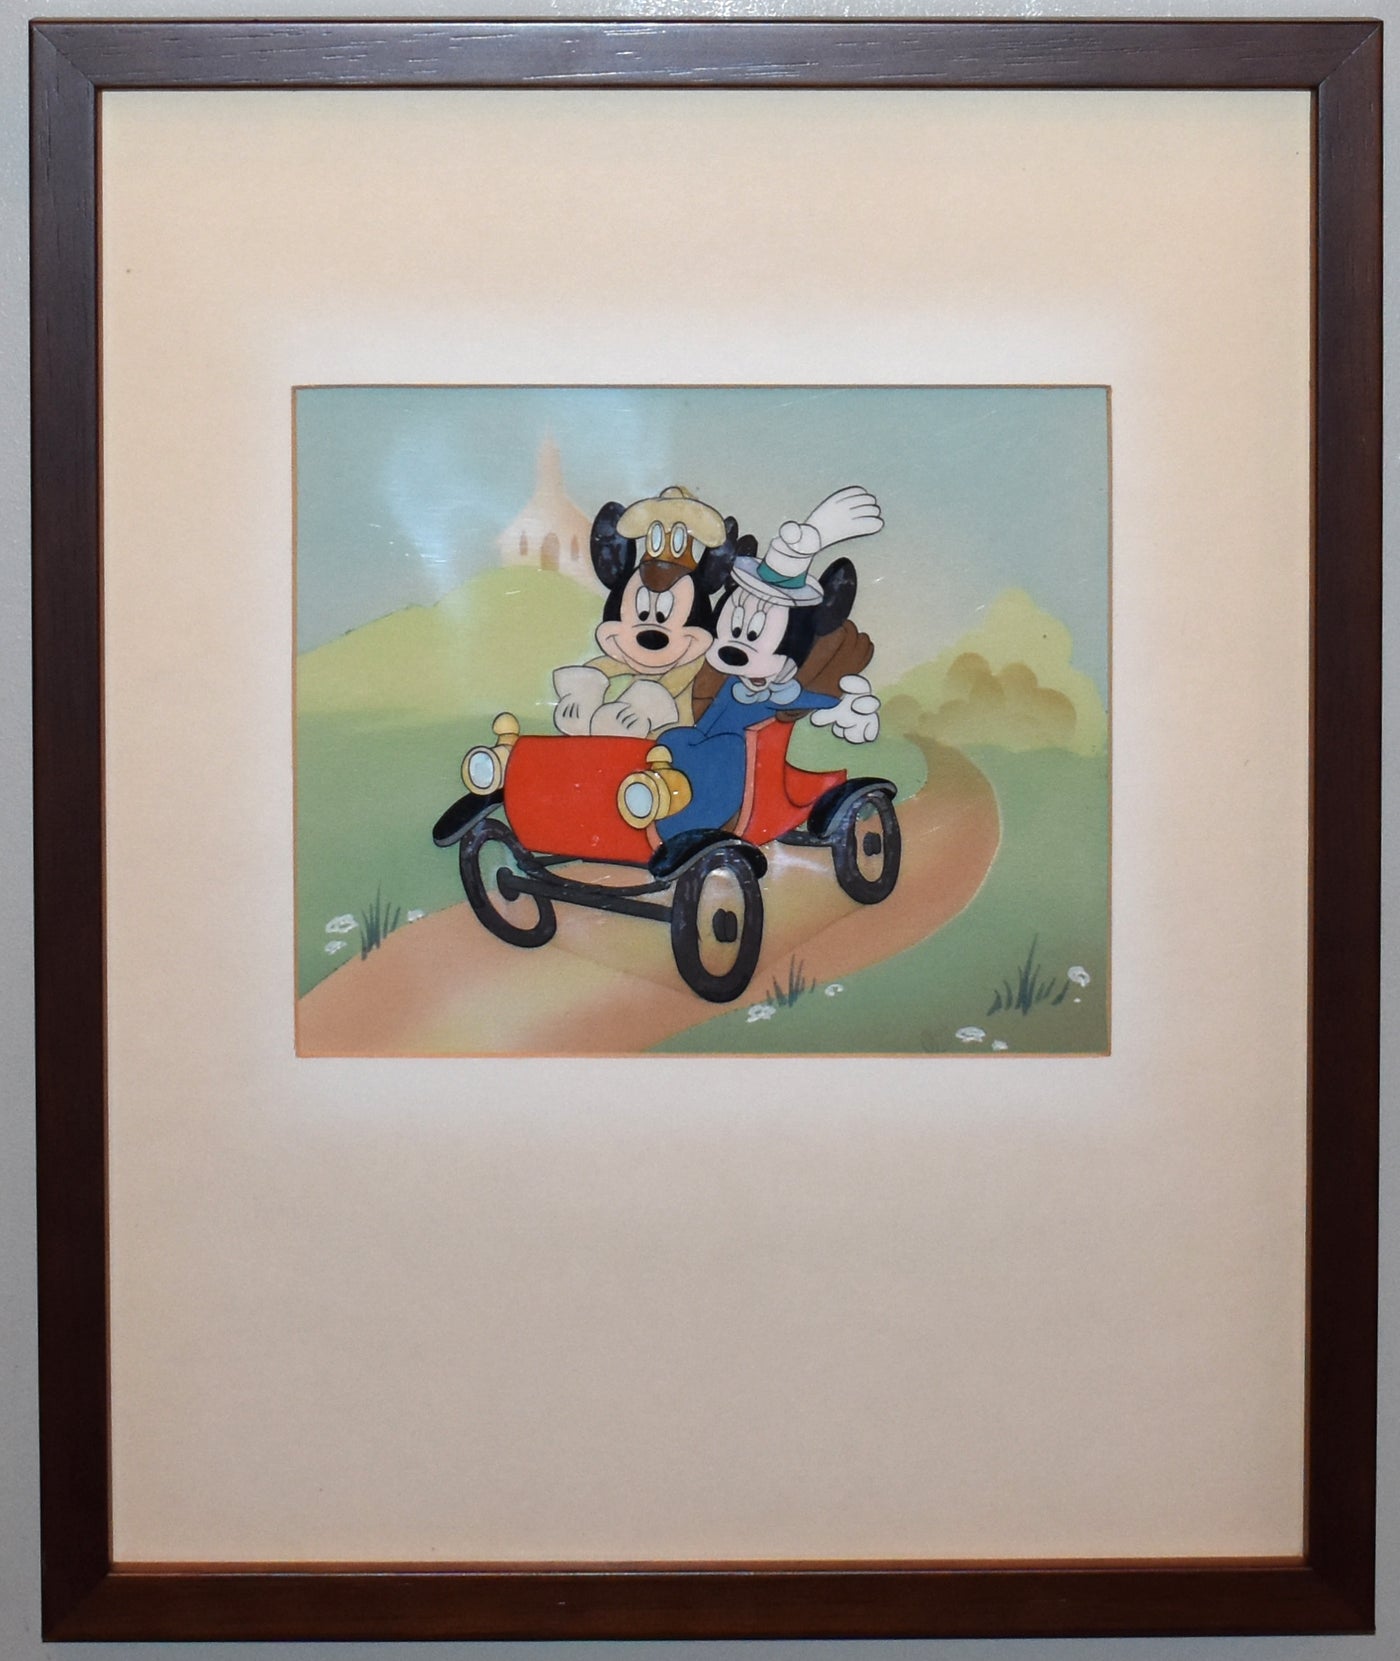 Original Walt Disney Production Cel from The Nifty Nineties (1941) Featuring Mickey Mouse